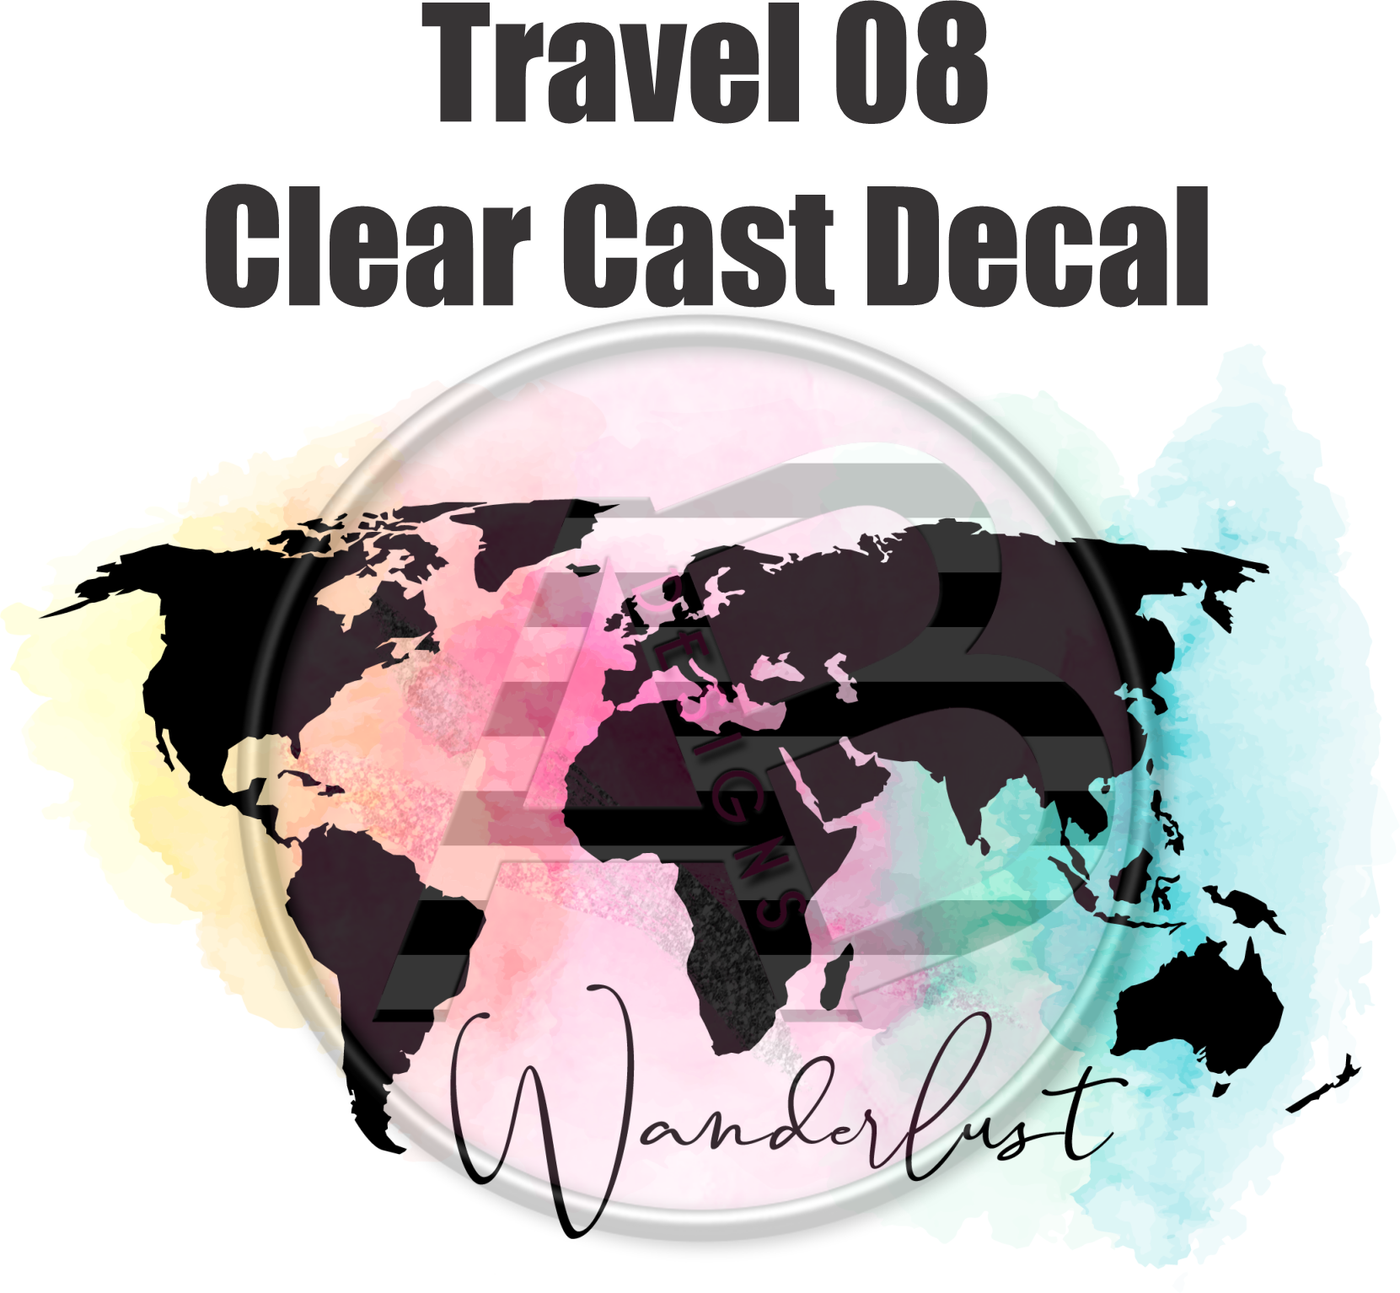 Travel 08 - Clear Cast Decal